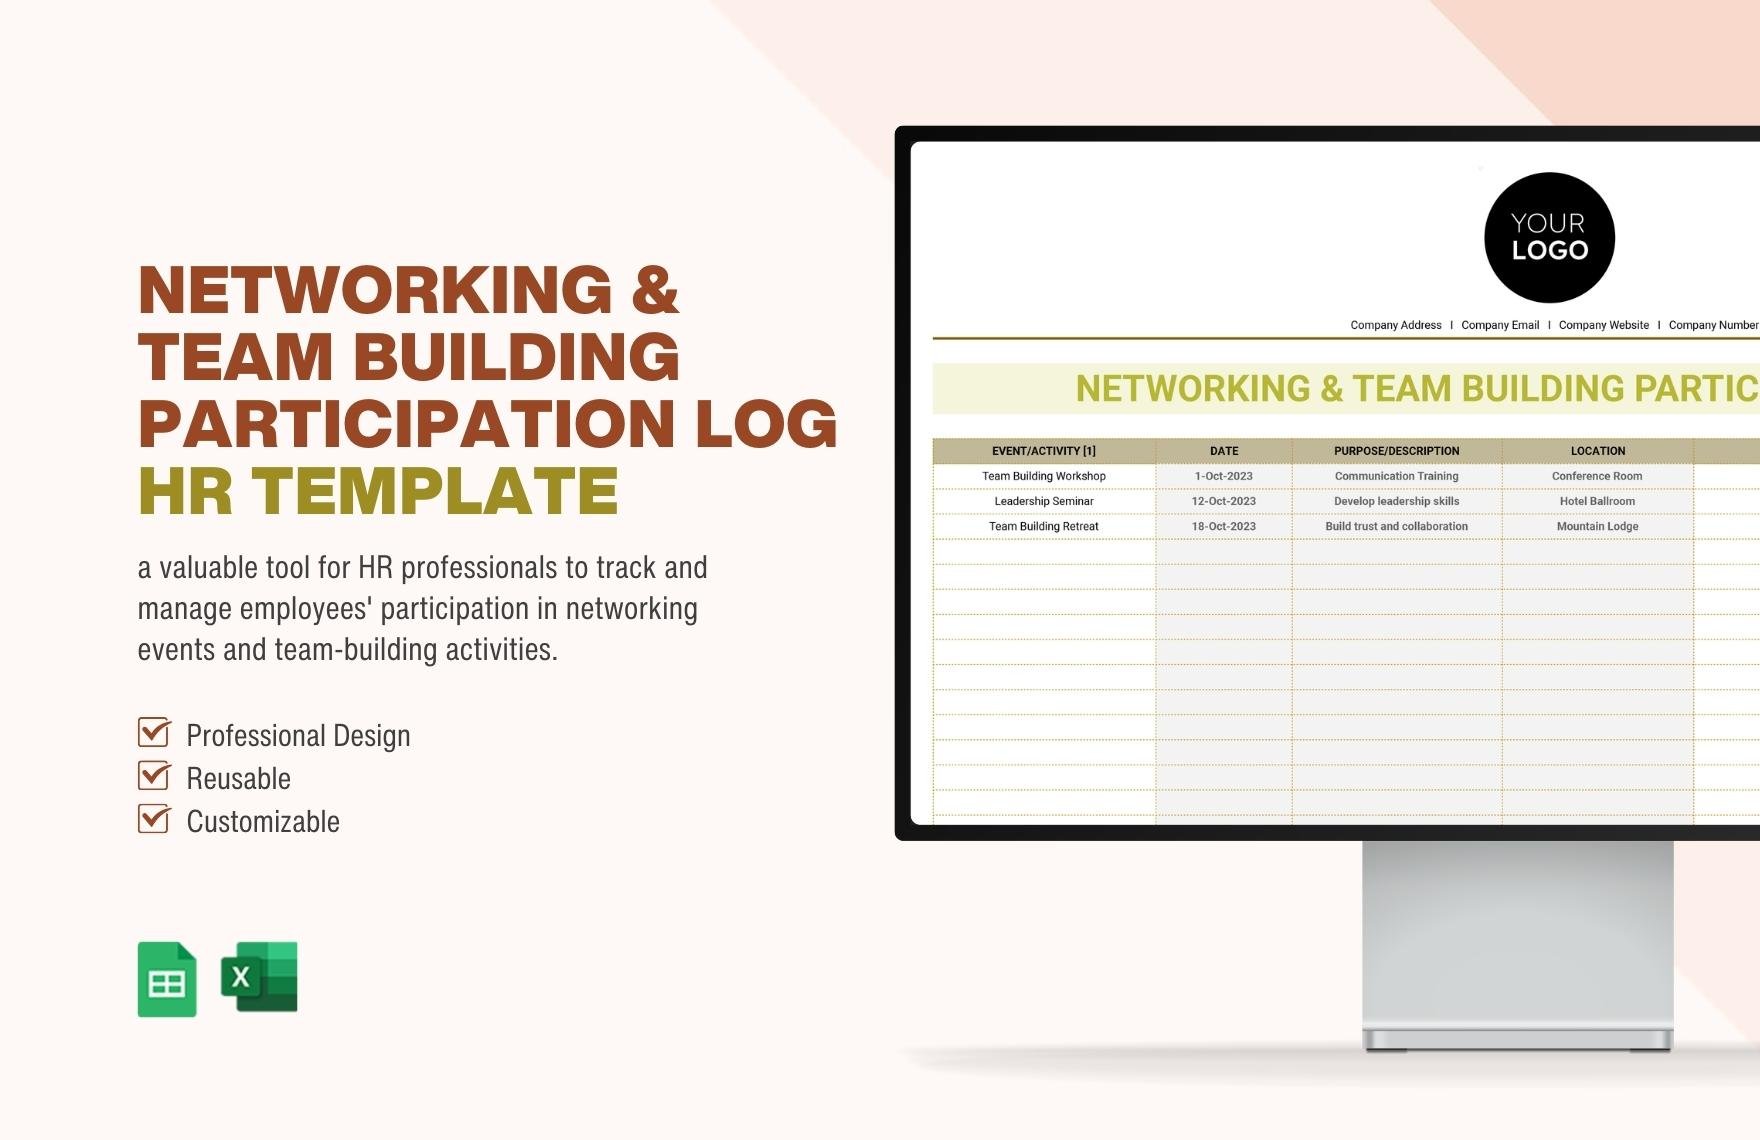 Networking & Team Building Participation Log HR Template